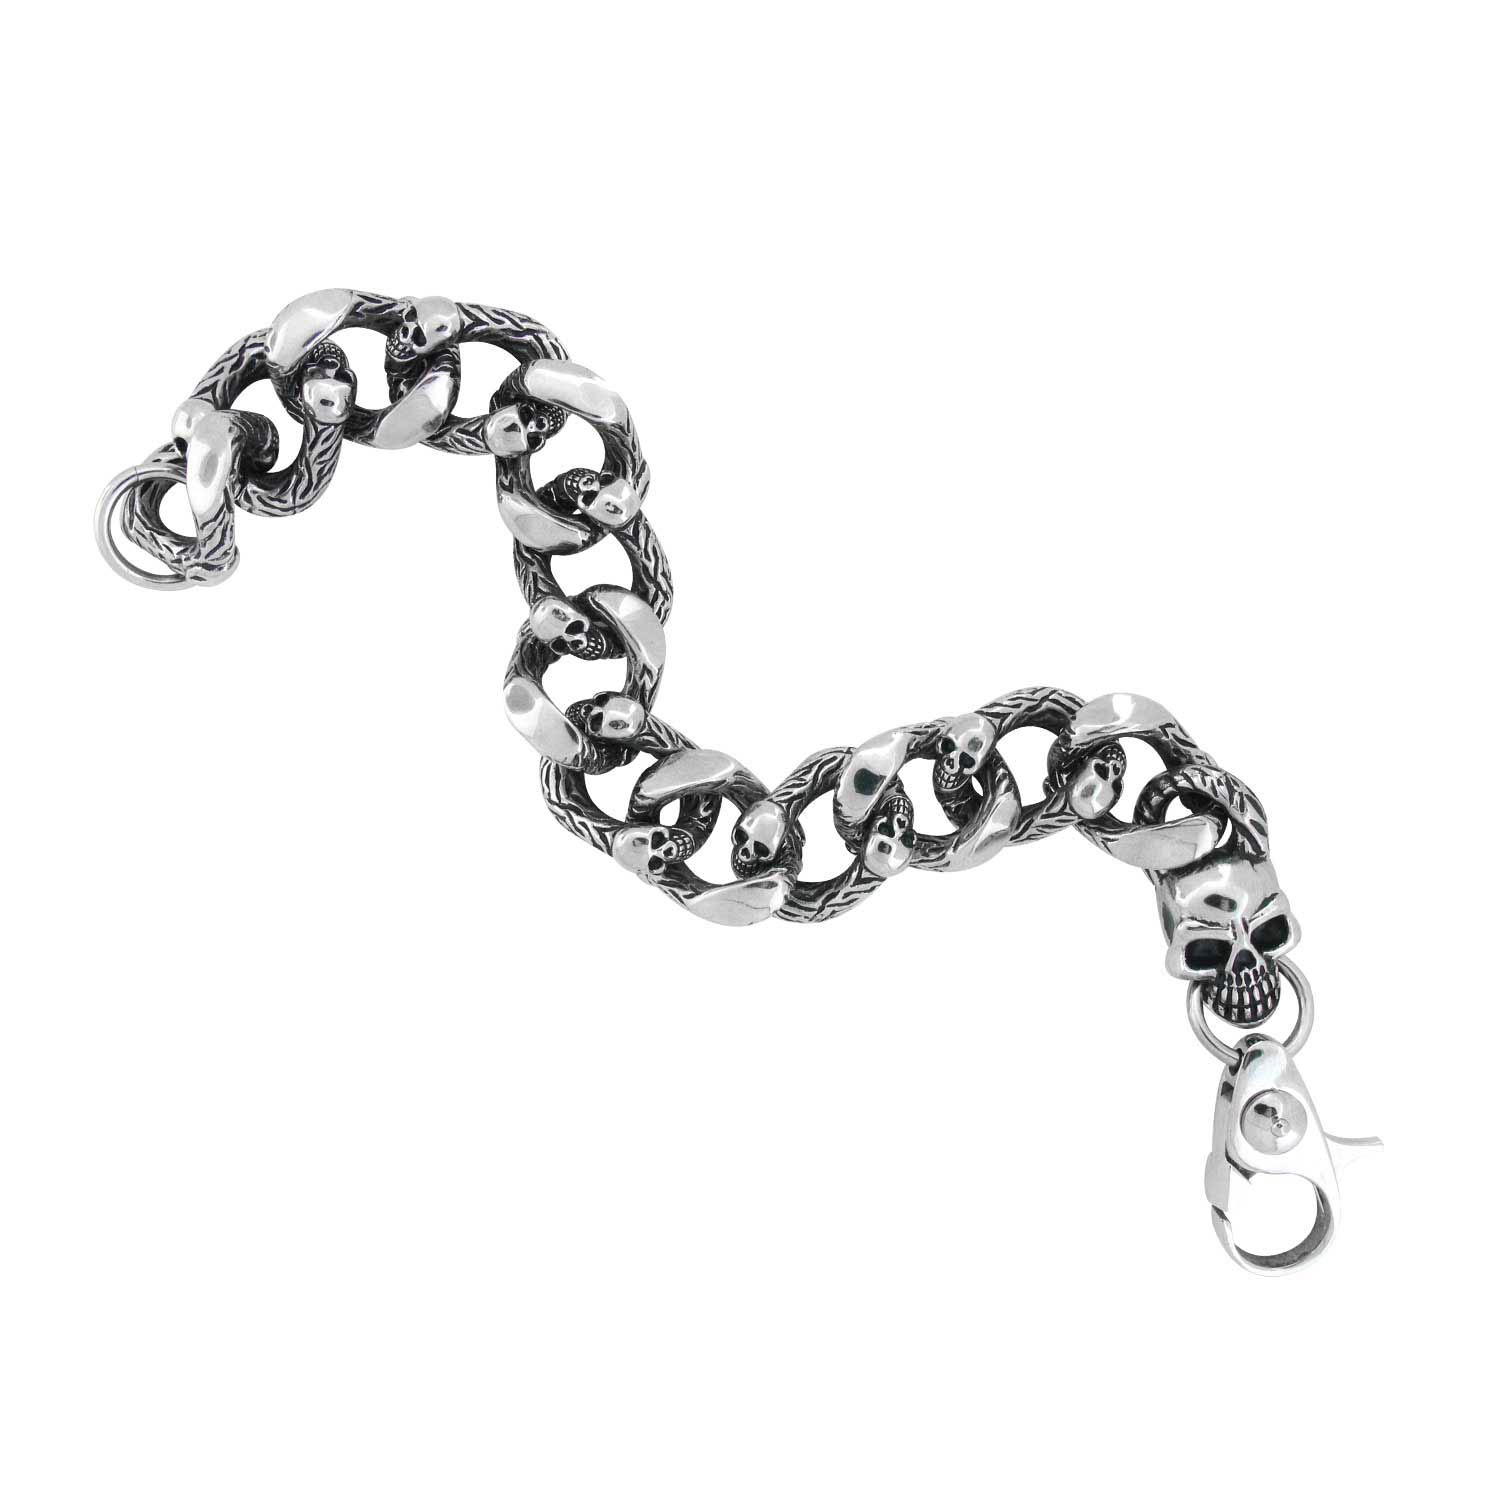 Heavy Duty Curb Chain Bracelet with Casted Skulls Image 2 Spath Jewelers Bartow, FL